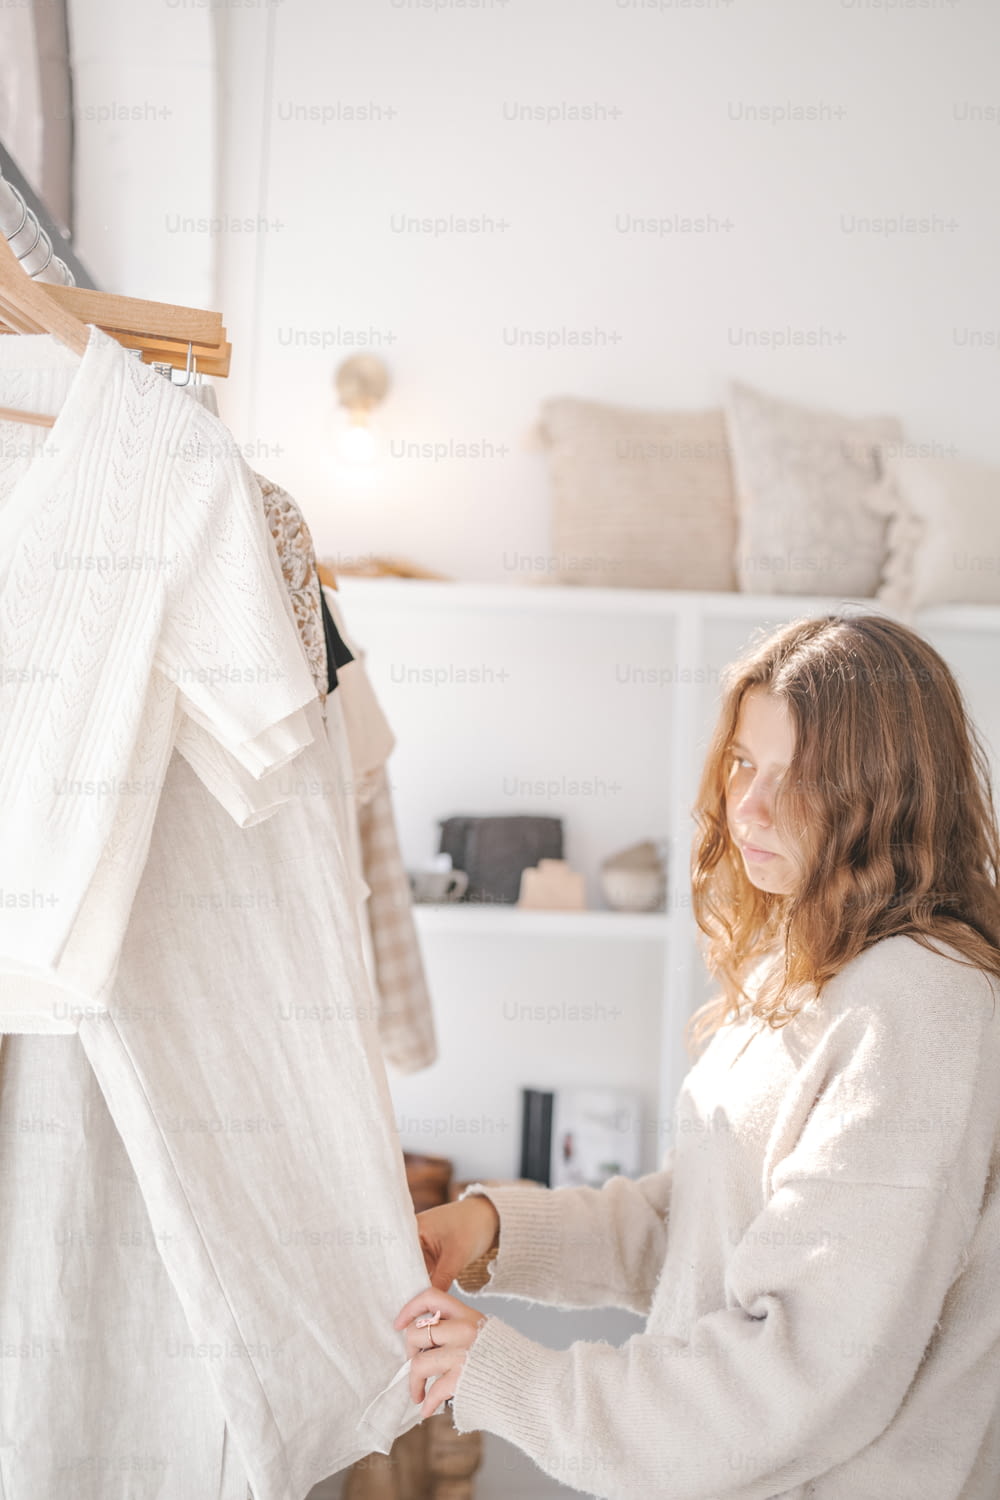 a woman looking at a white shirt hanging on a rack